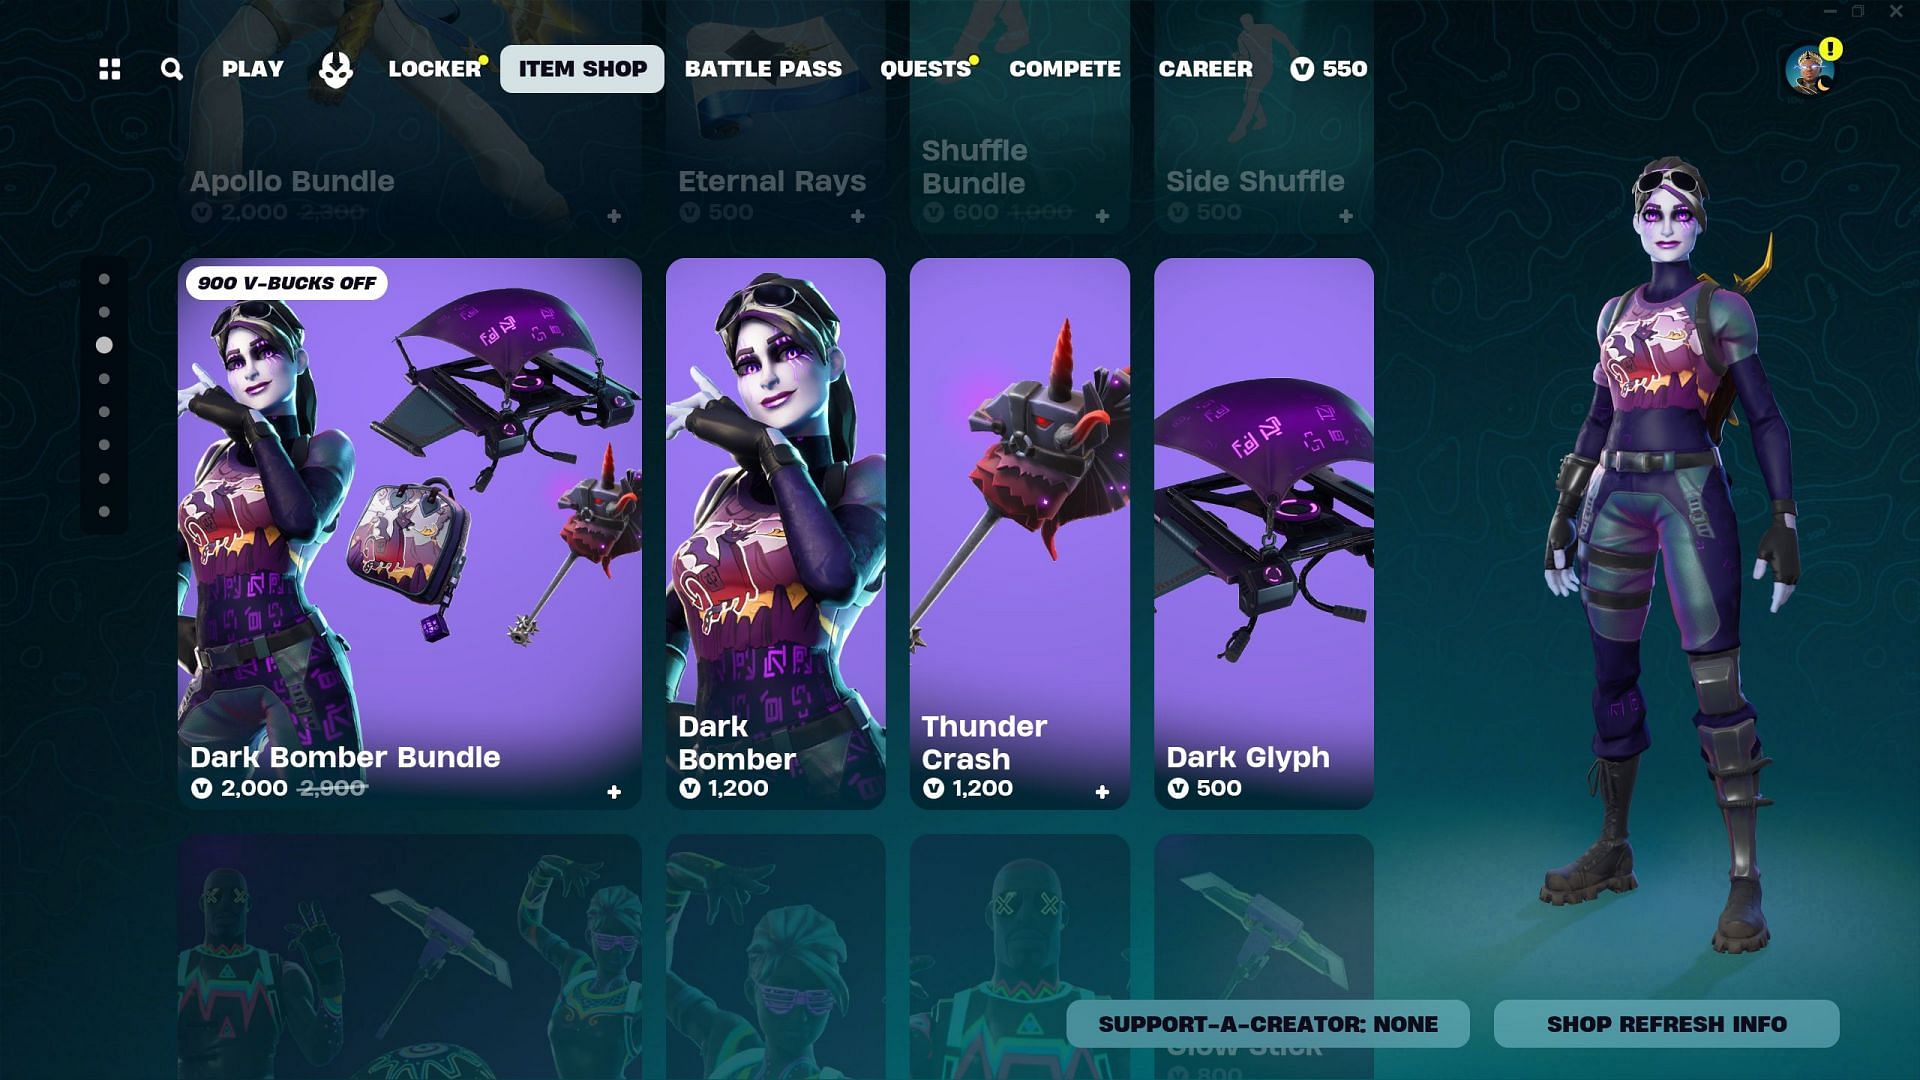 Dark Bomber skin is currently listed in the Item Shop. (Image via Epic Games/Fortnite)